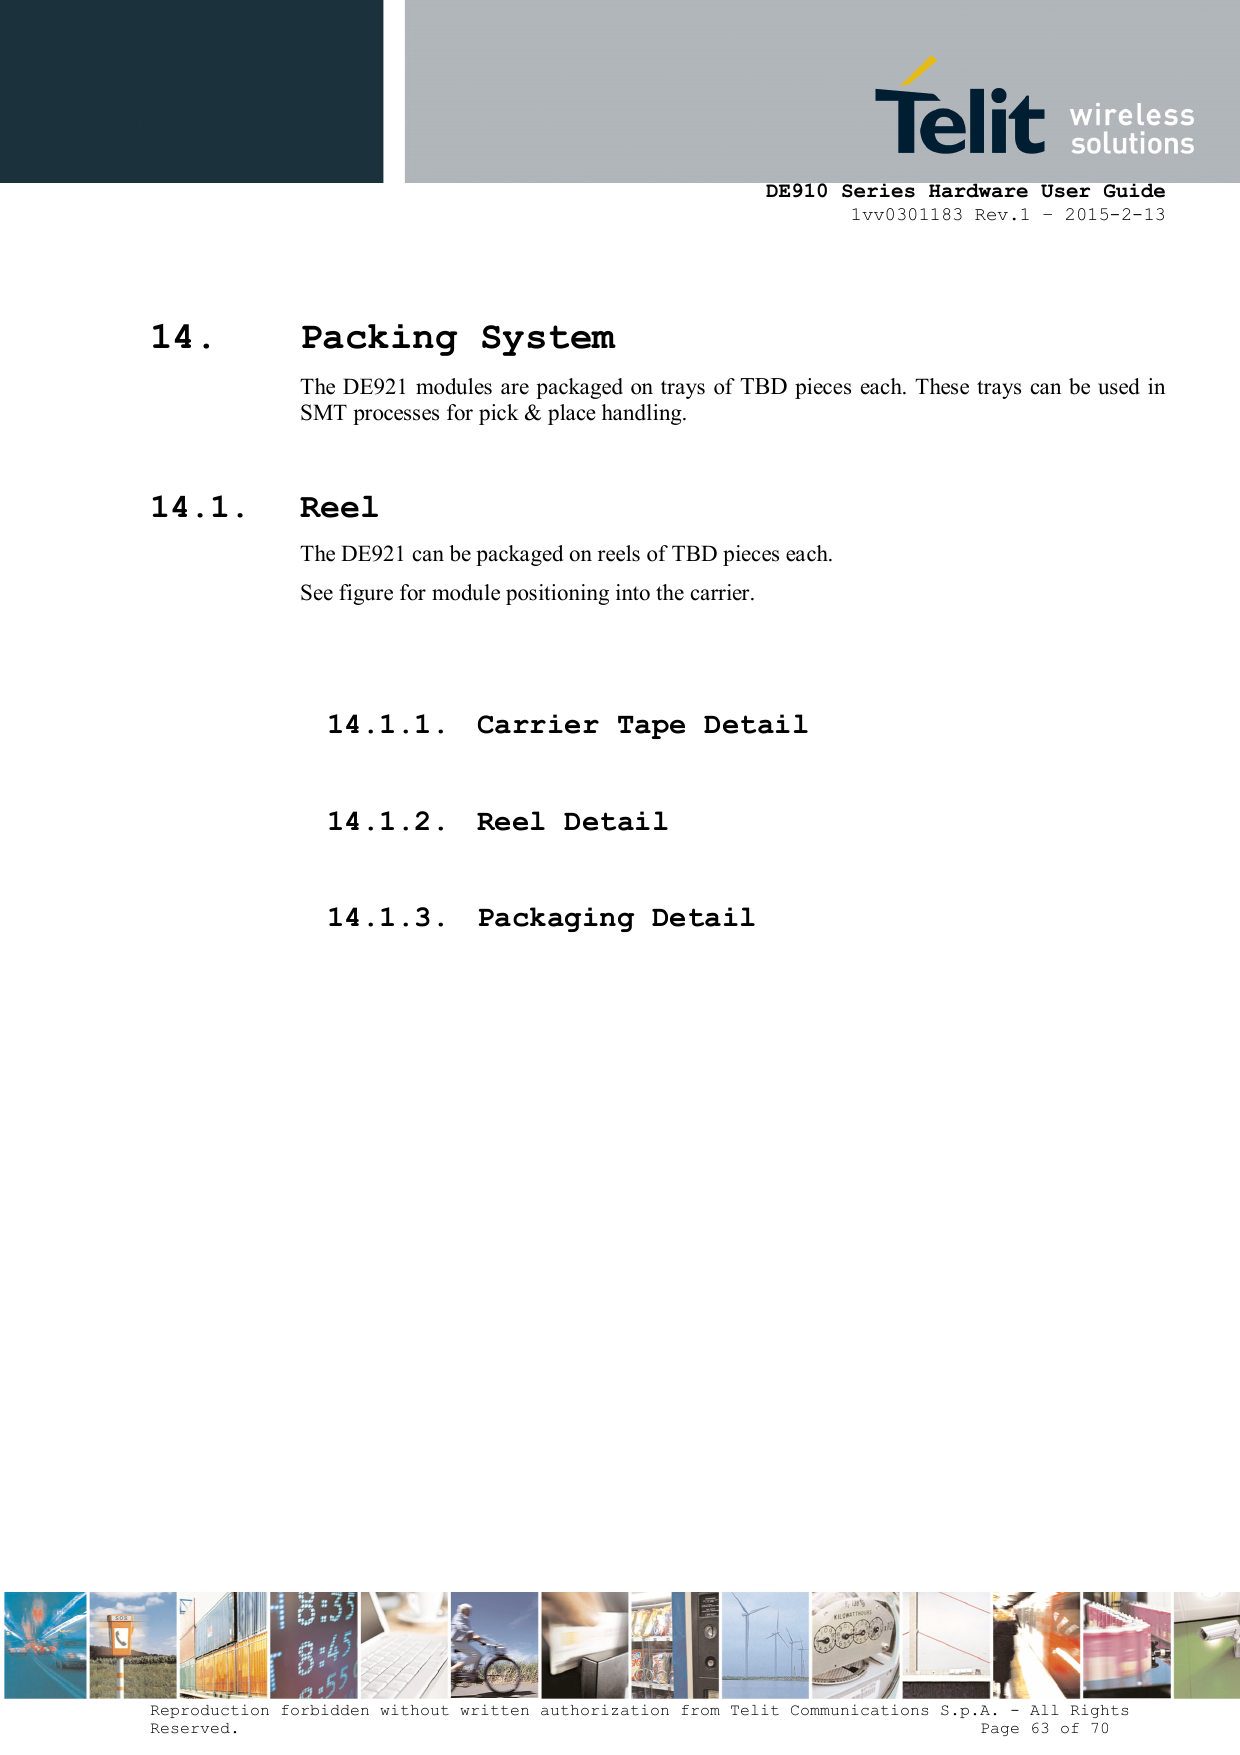      DE910 Series Hardware User Guide 1vv0301183 Rev.1 – 2015-2-13 Reproduction forbidden without written authorization from Telit Communications S.p.A. - All Rights Reserved.                                                                          Page 63 of 70 14. Packing System The DE921 modules are packaged on trays of TBD pieces each. These  trays can be  used  in SMT processes for pick &amp; place handling.  14.1. Reel The DE921 can be packaged on reels of TBD pieces each. See figure for module positioning into the carrier.   14.1.1. Carrier Tape Detail  14.1.2. Reel Detail  14.1.3. Packaging Detail                